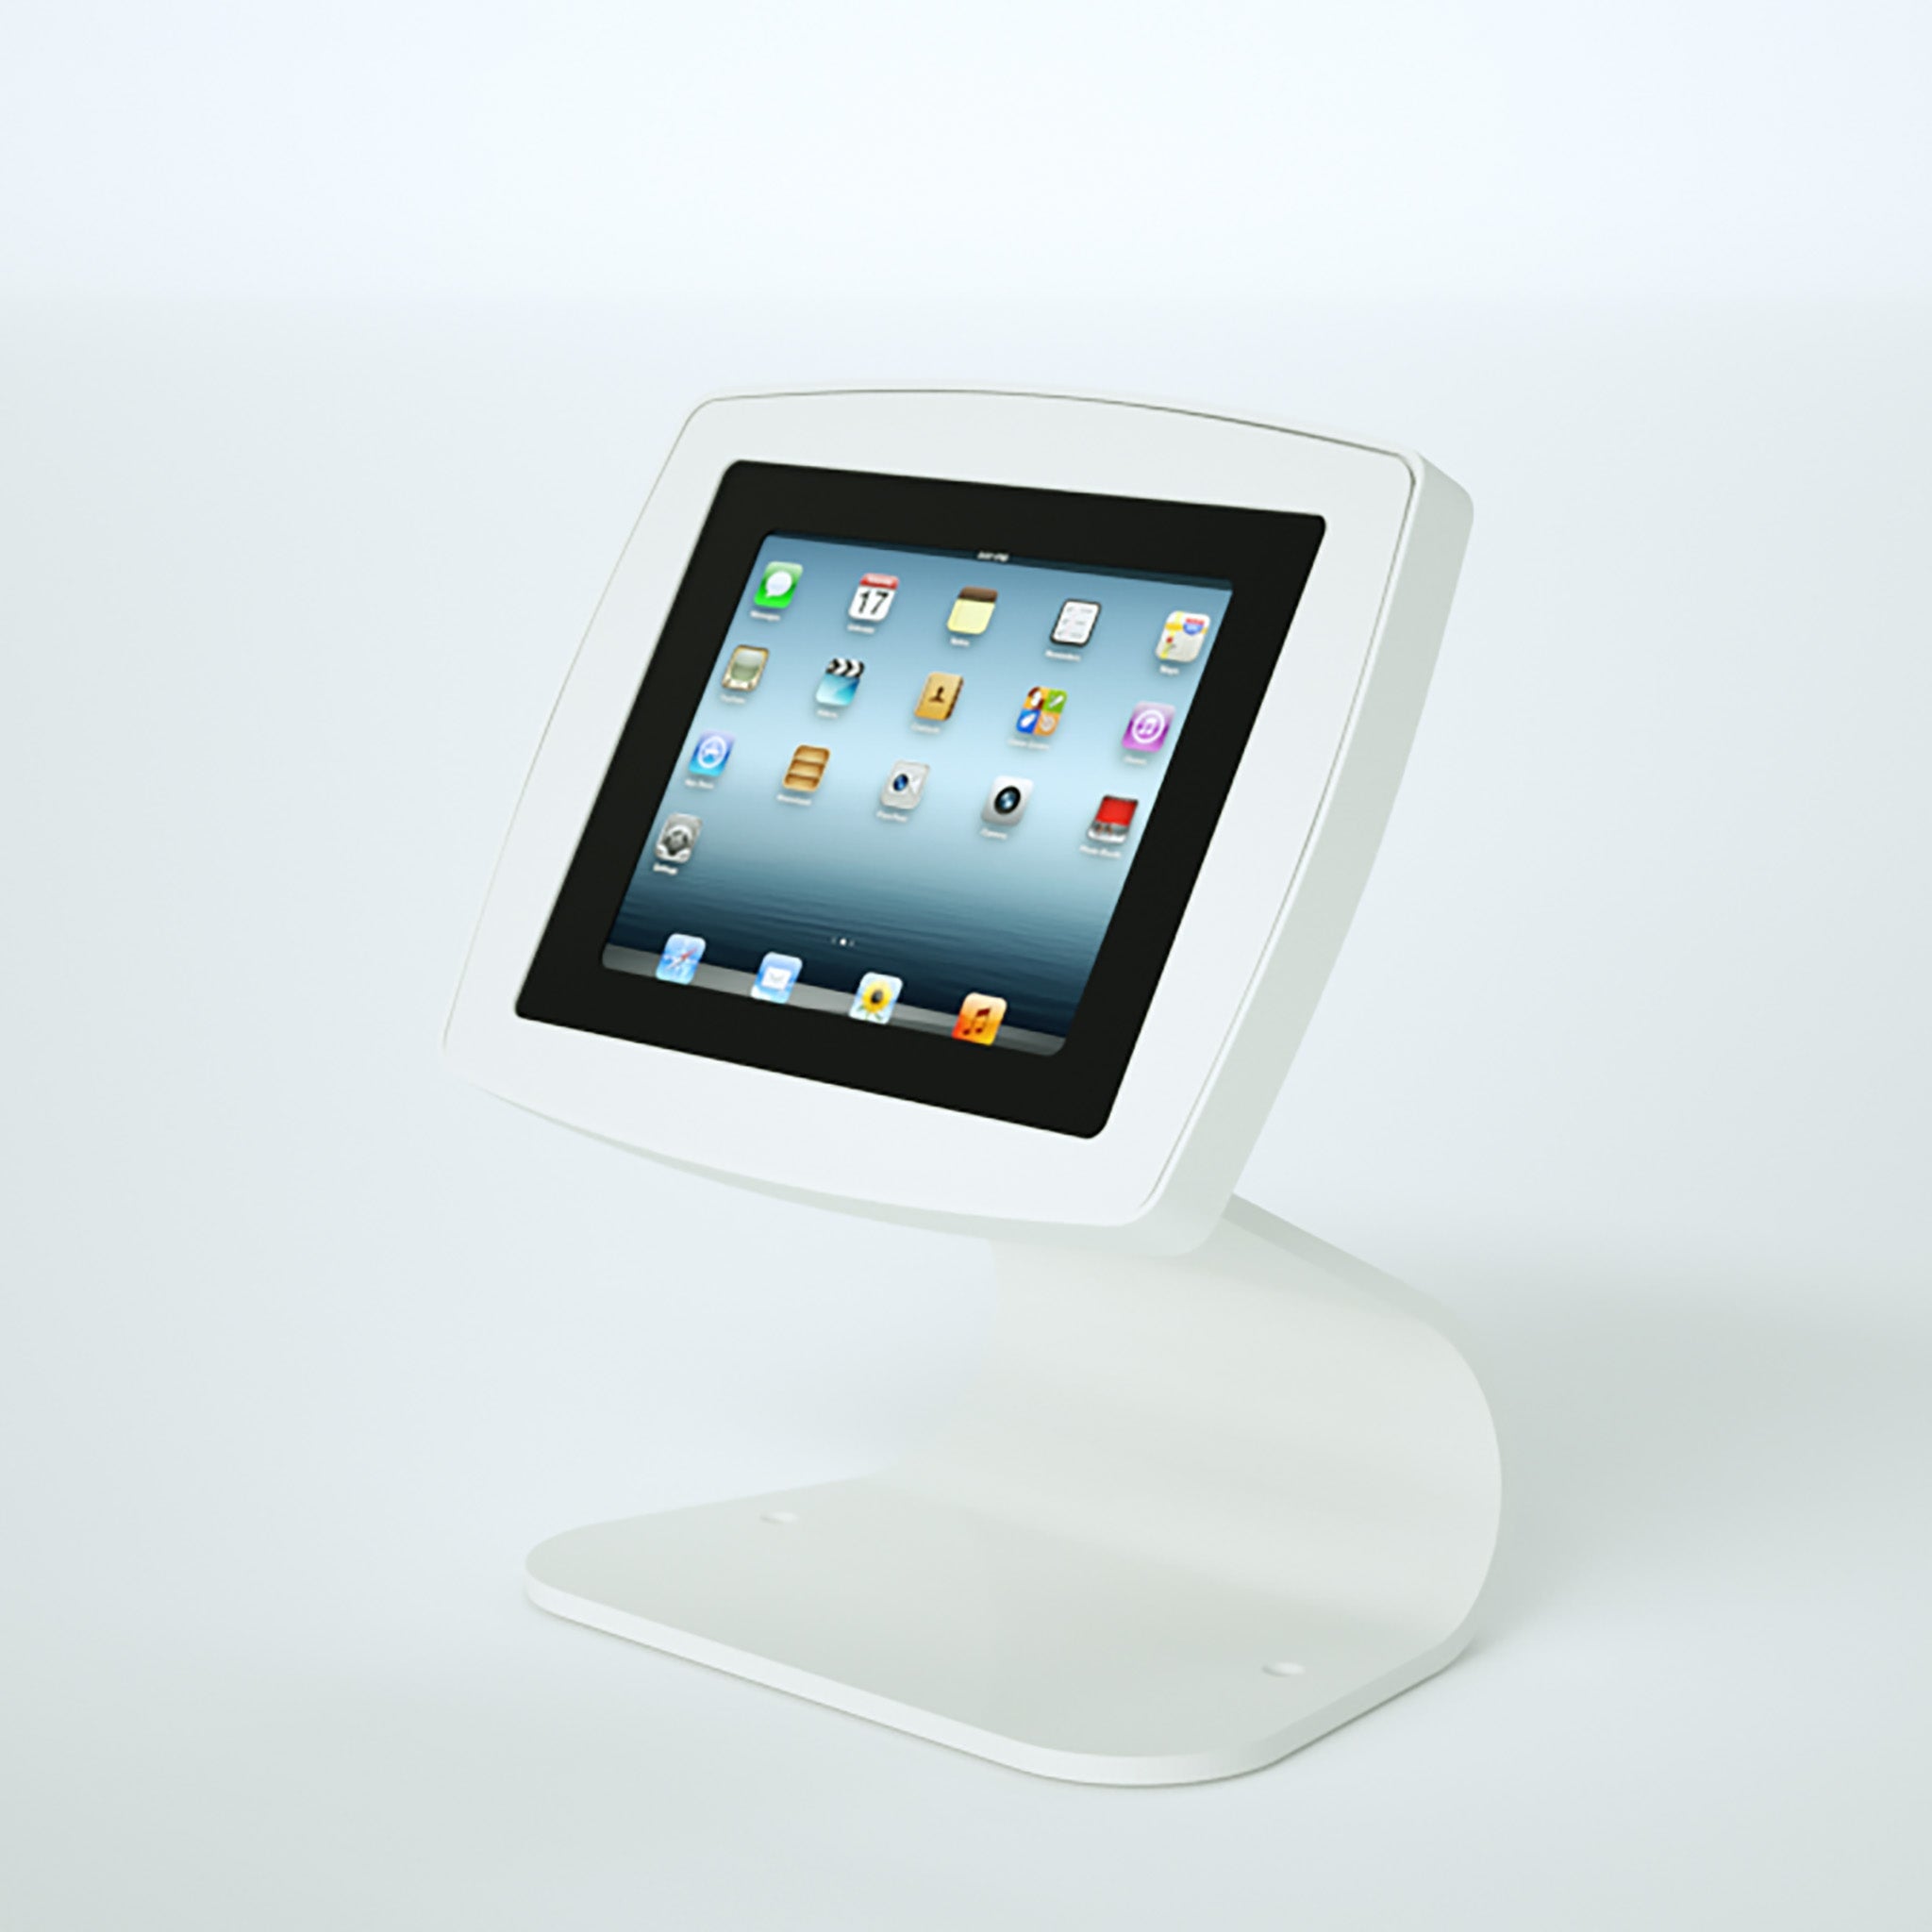 White Curve iPad and Tablet Desktop stand.